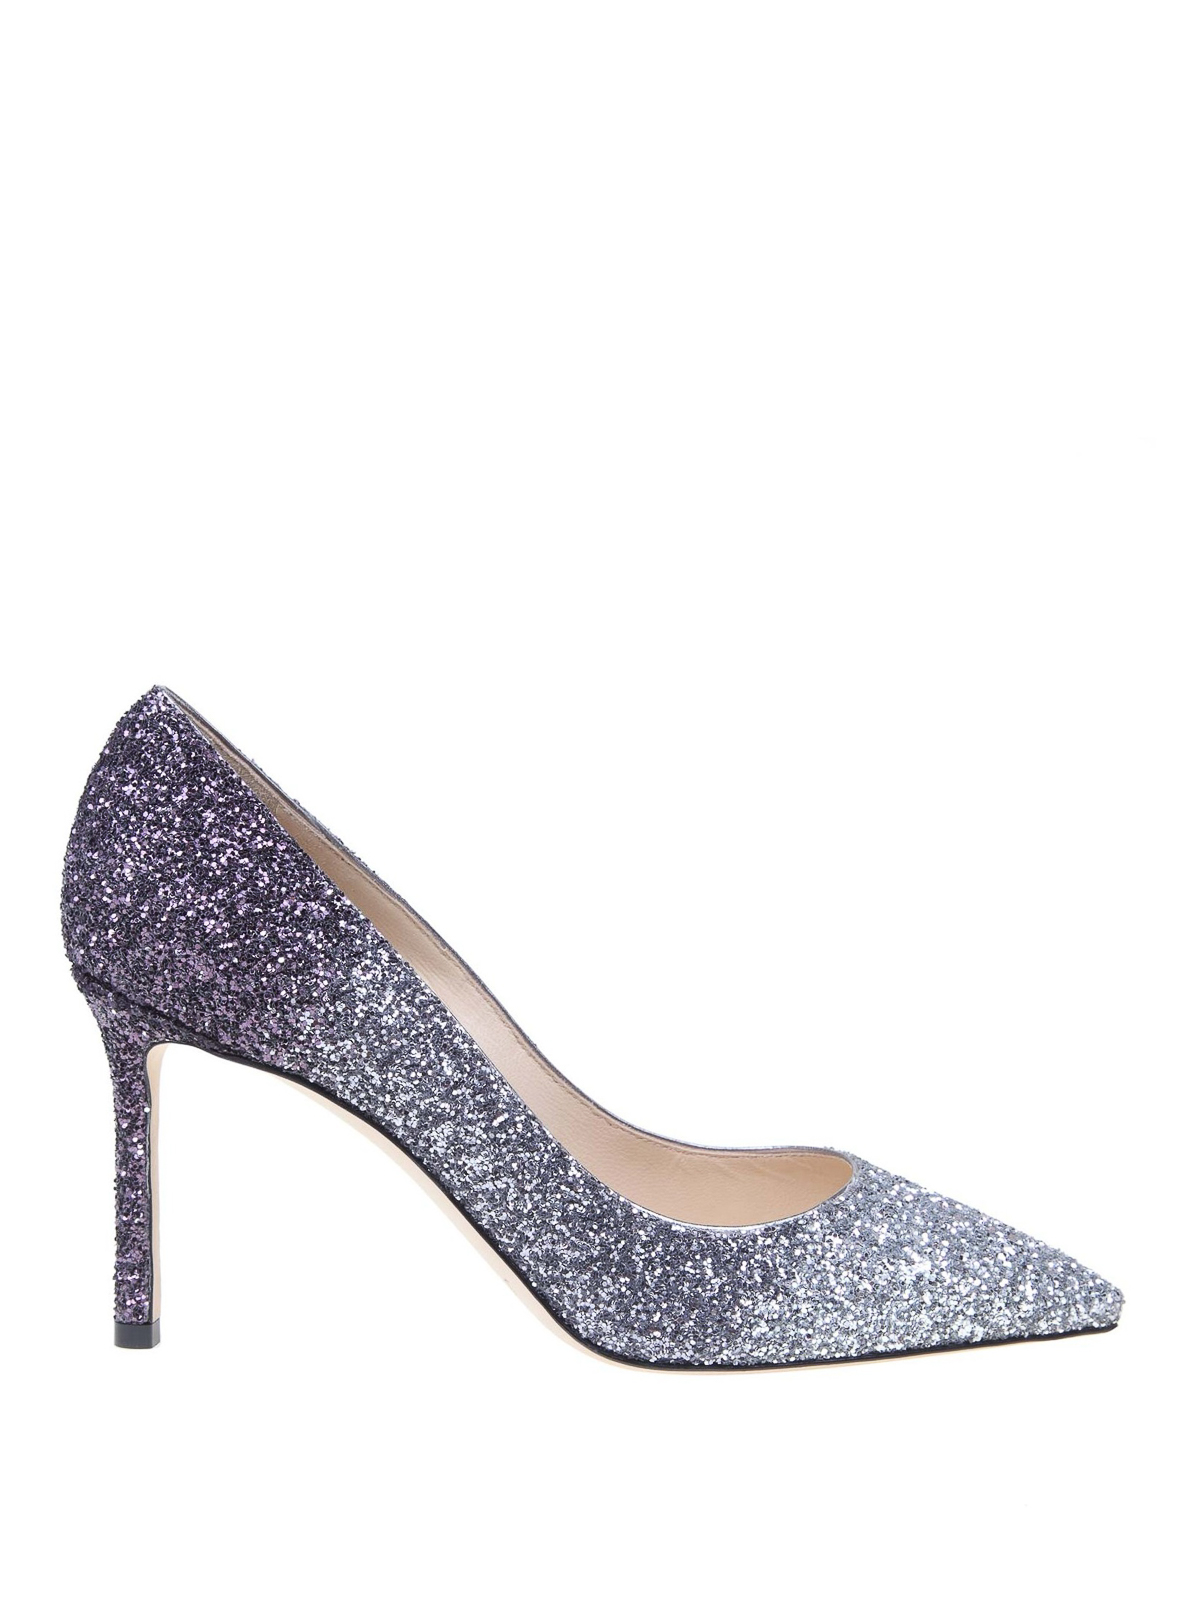 Court shoes Jimmy Choo - Romy 85 glitter court shoes ...